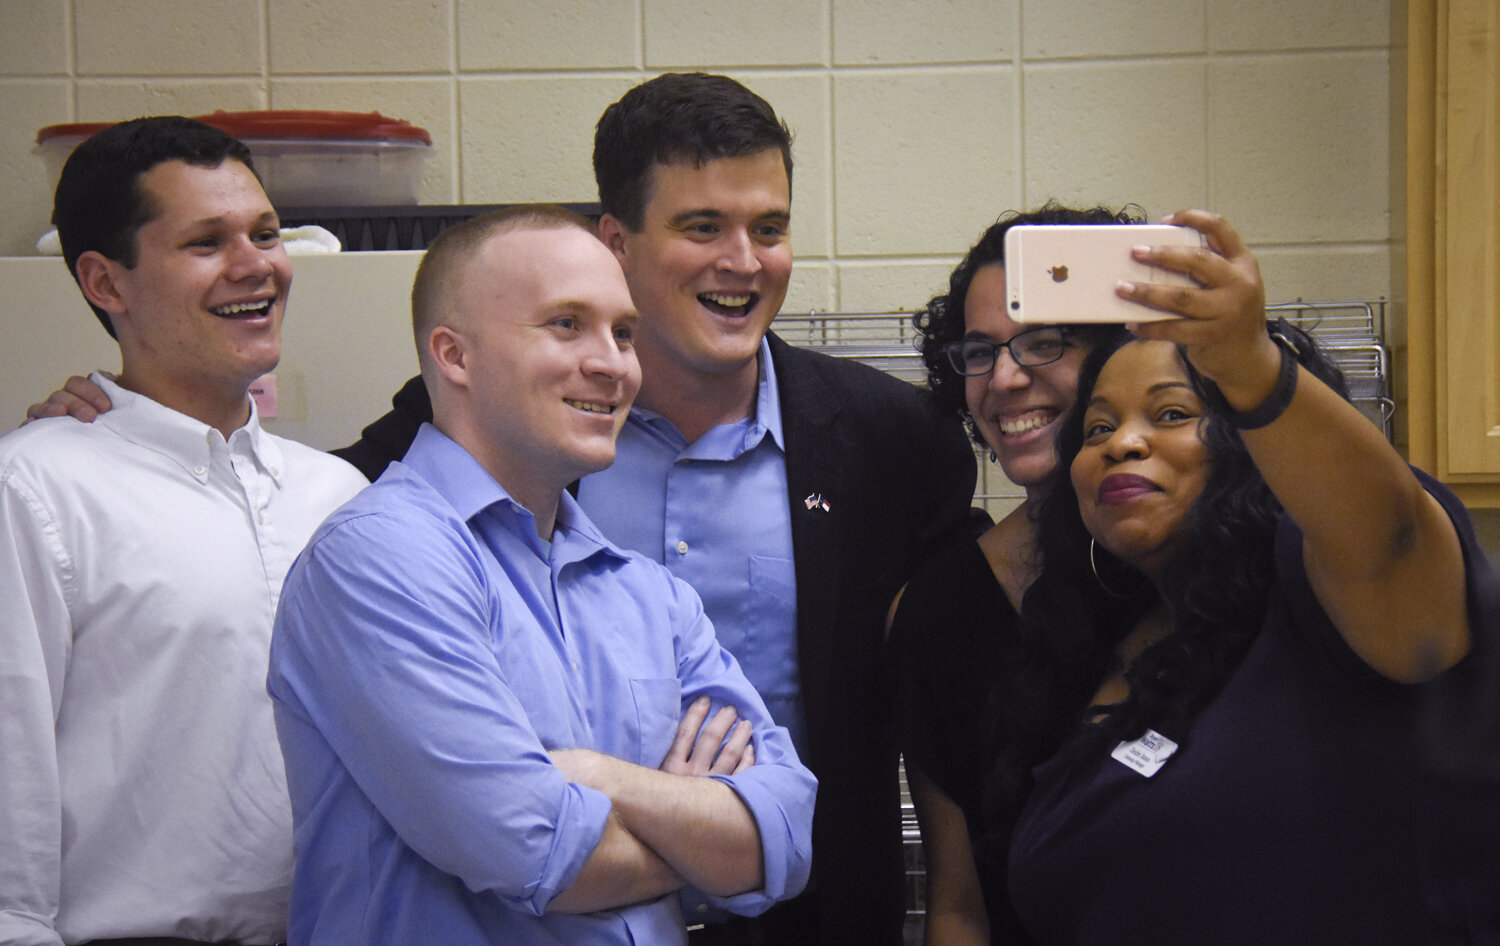  August 15, 2018 A quick selfie with campaign staffers before a town hall event Yanceyville, NC  